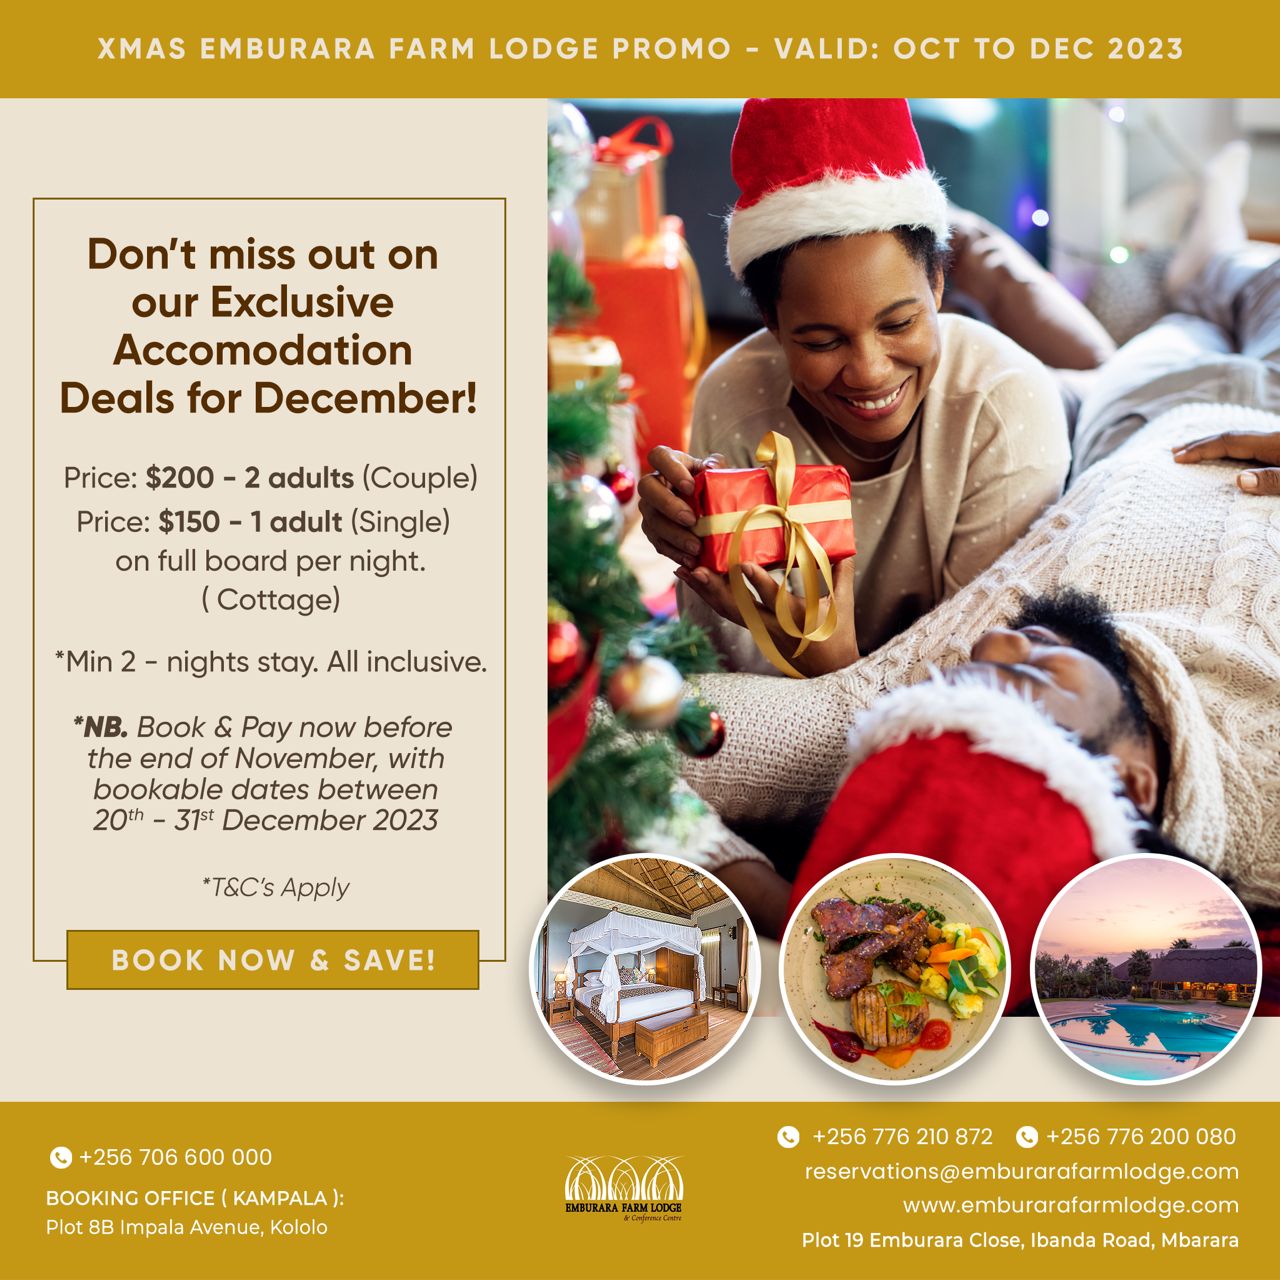 Book now to secure your spot and create lasting memories this Christmas. Don't miss out on our incredible offers, as availability is limited. Come and celebrate the magic of the season with us at our lodge and delight in a sumptuous Christmas dinner, meticulously prepared by our talented chefs, featuring a delectable spread of traditional favorites and mouthwatering desserts.
📧 reservations@emburarafarmlodge.com
☎️ +256776210872 | +256776200080 | +256706666000
🌐 www.emburarafarmlodge.com
#christmasoffer #getaway #lifeonthefarm #MagicalEscape #emburarafarmlodgecares